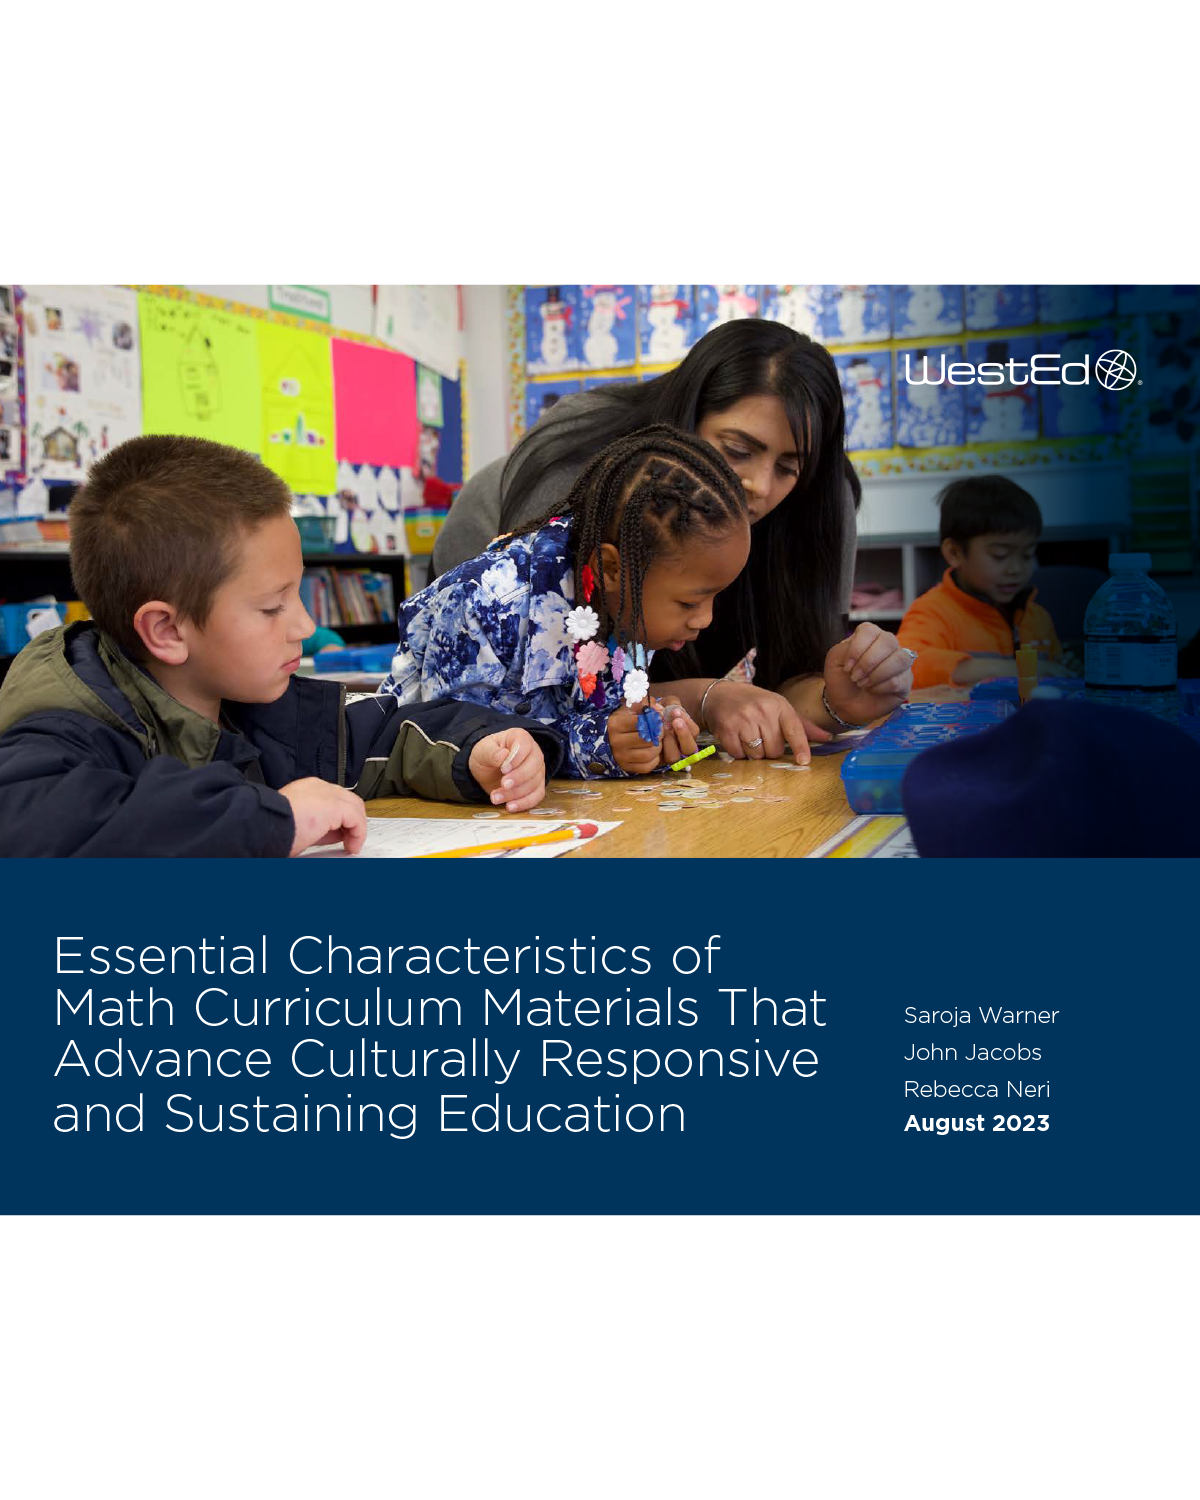 Essential Characteristics of Math Curriculum Materials That Advance Culturally Responsive and Sustaining Education